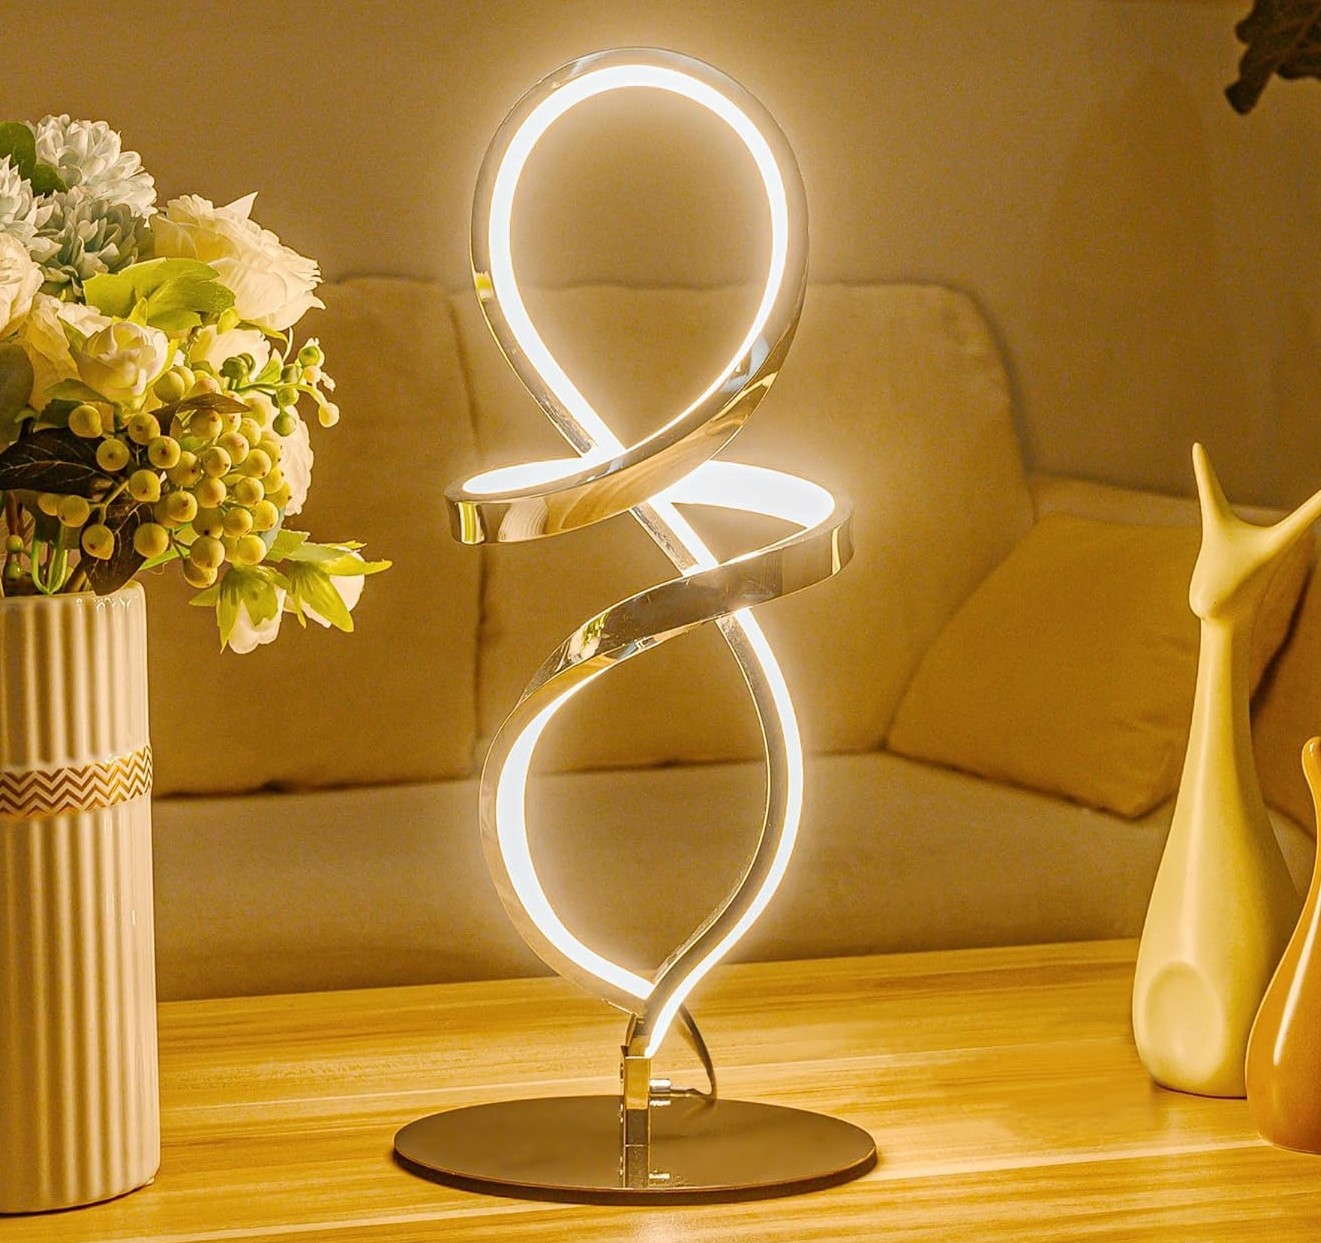 Mayful Modern Table Lamp, LED Spiral Lamp, Stepless Dimmable